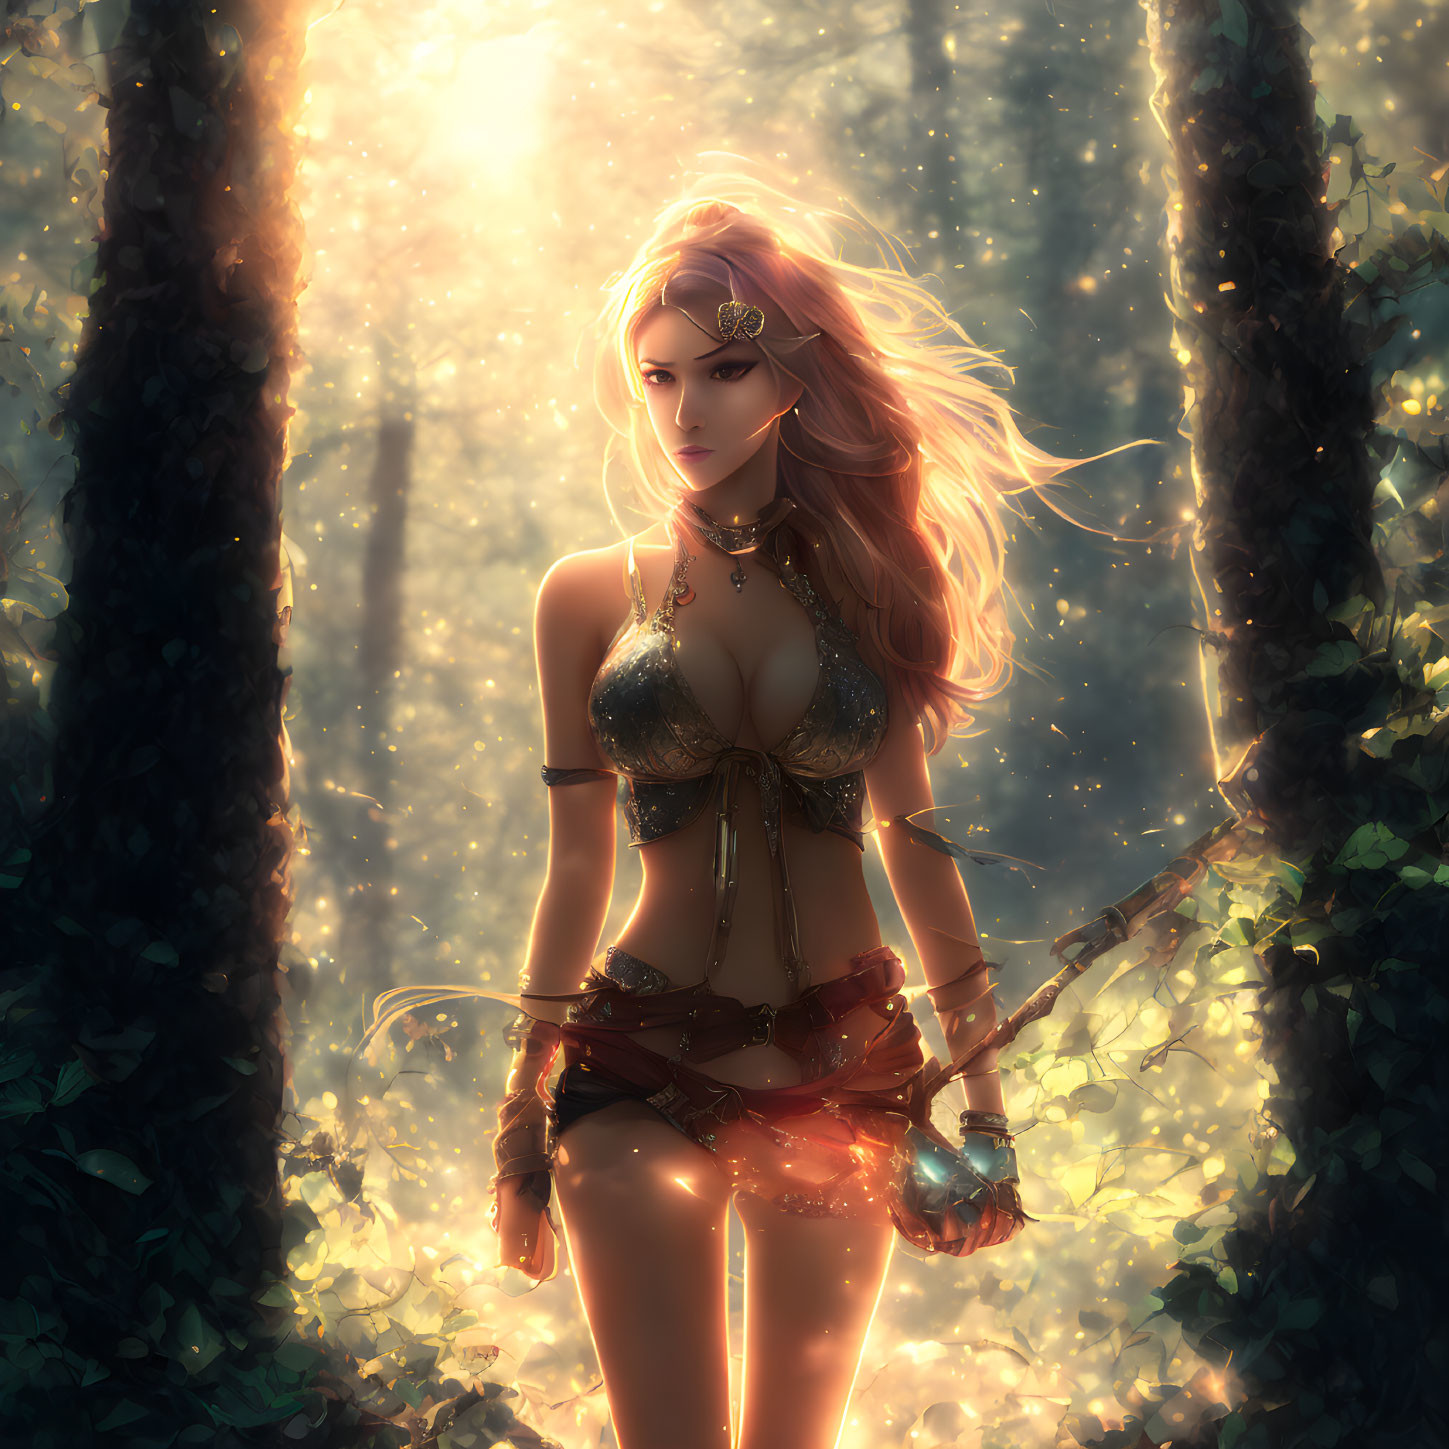 Fantasy illustration of woman with long hair in forest with ethereal sunlight.